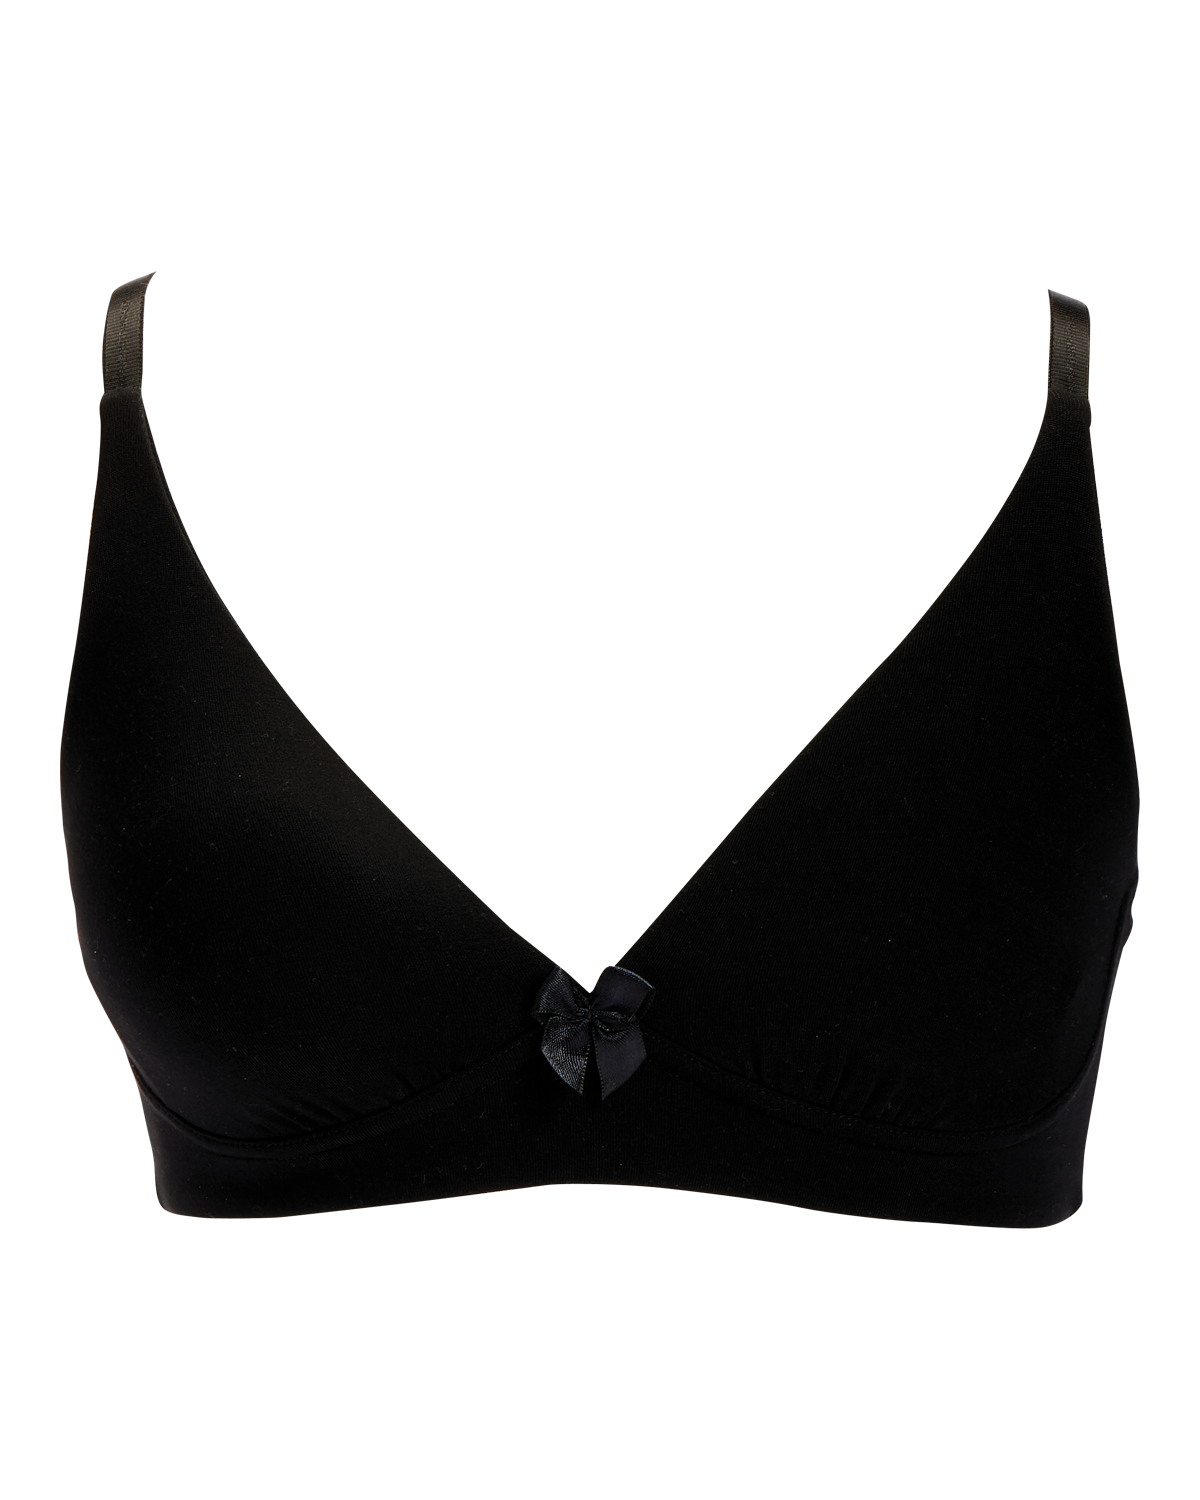 Molly Pocketed Plunge Bra |  AnaOno | Post-surgery bras made just for those affected by breast cancer and breast surgery.